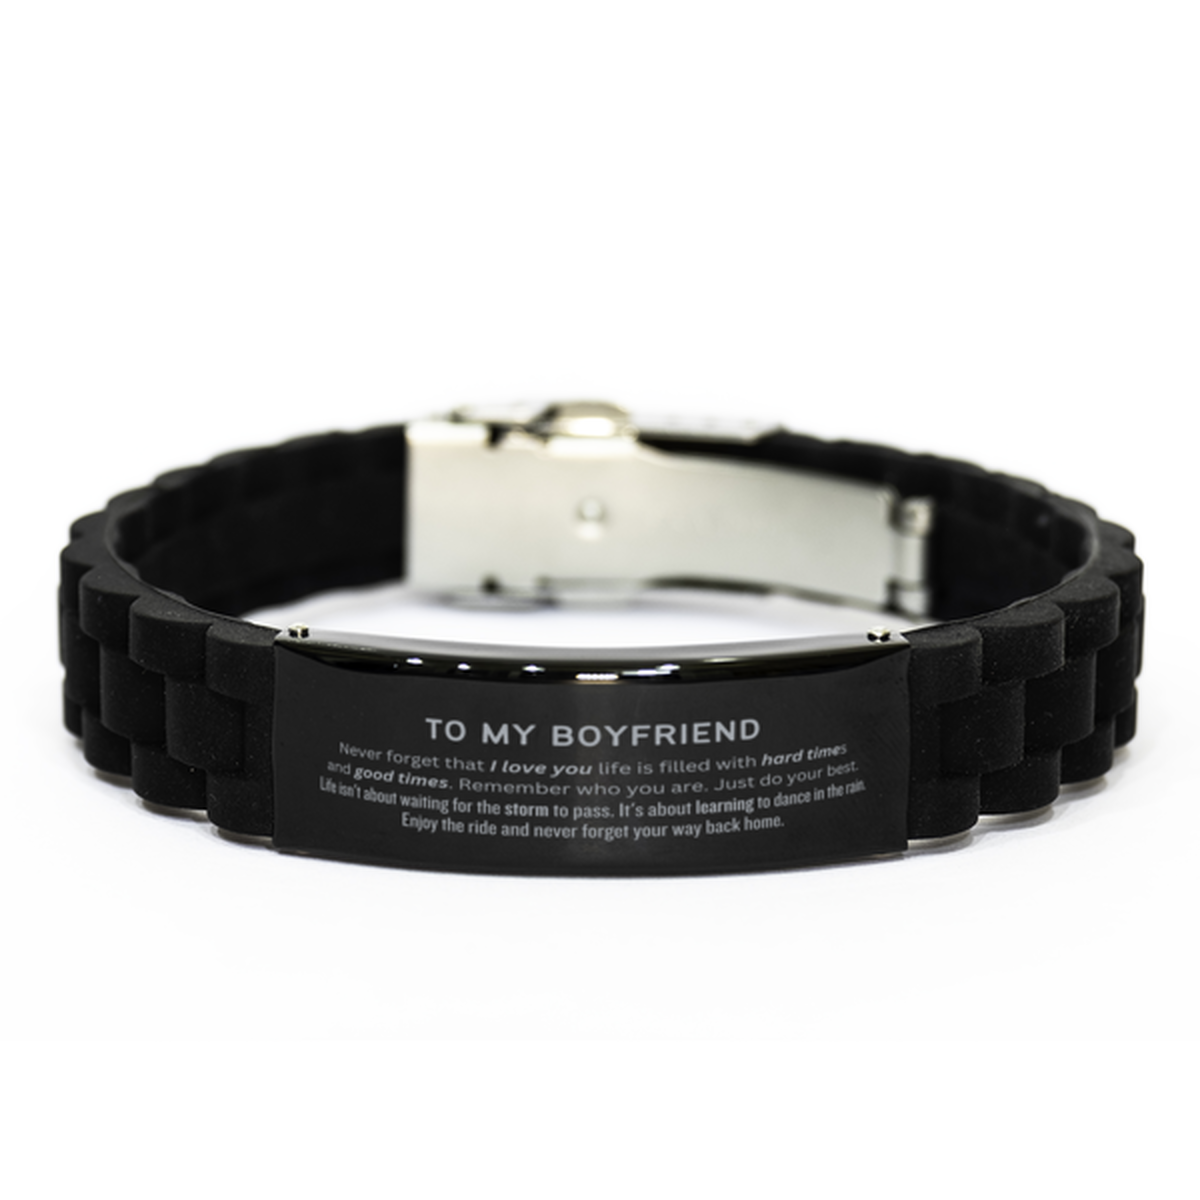 Christmas Boyfriend Black Glidelock Clasp Bracelet Gifts, To My Boyfriend Birthday Thank You Gifts For Boyfriend, Graduation Unique Gifts For Boyfriend To My Boyfriend Never forget that I love you life is filled with hard times and good times. Remember wh